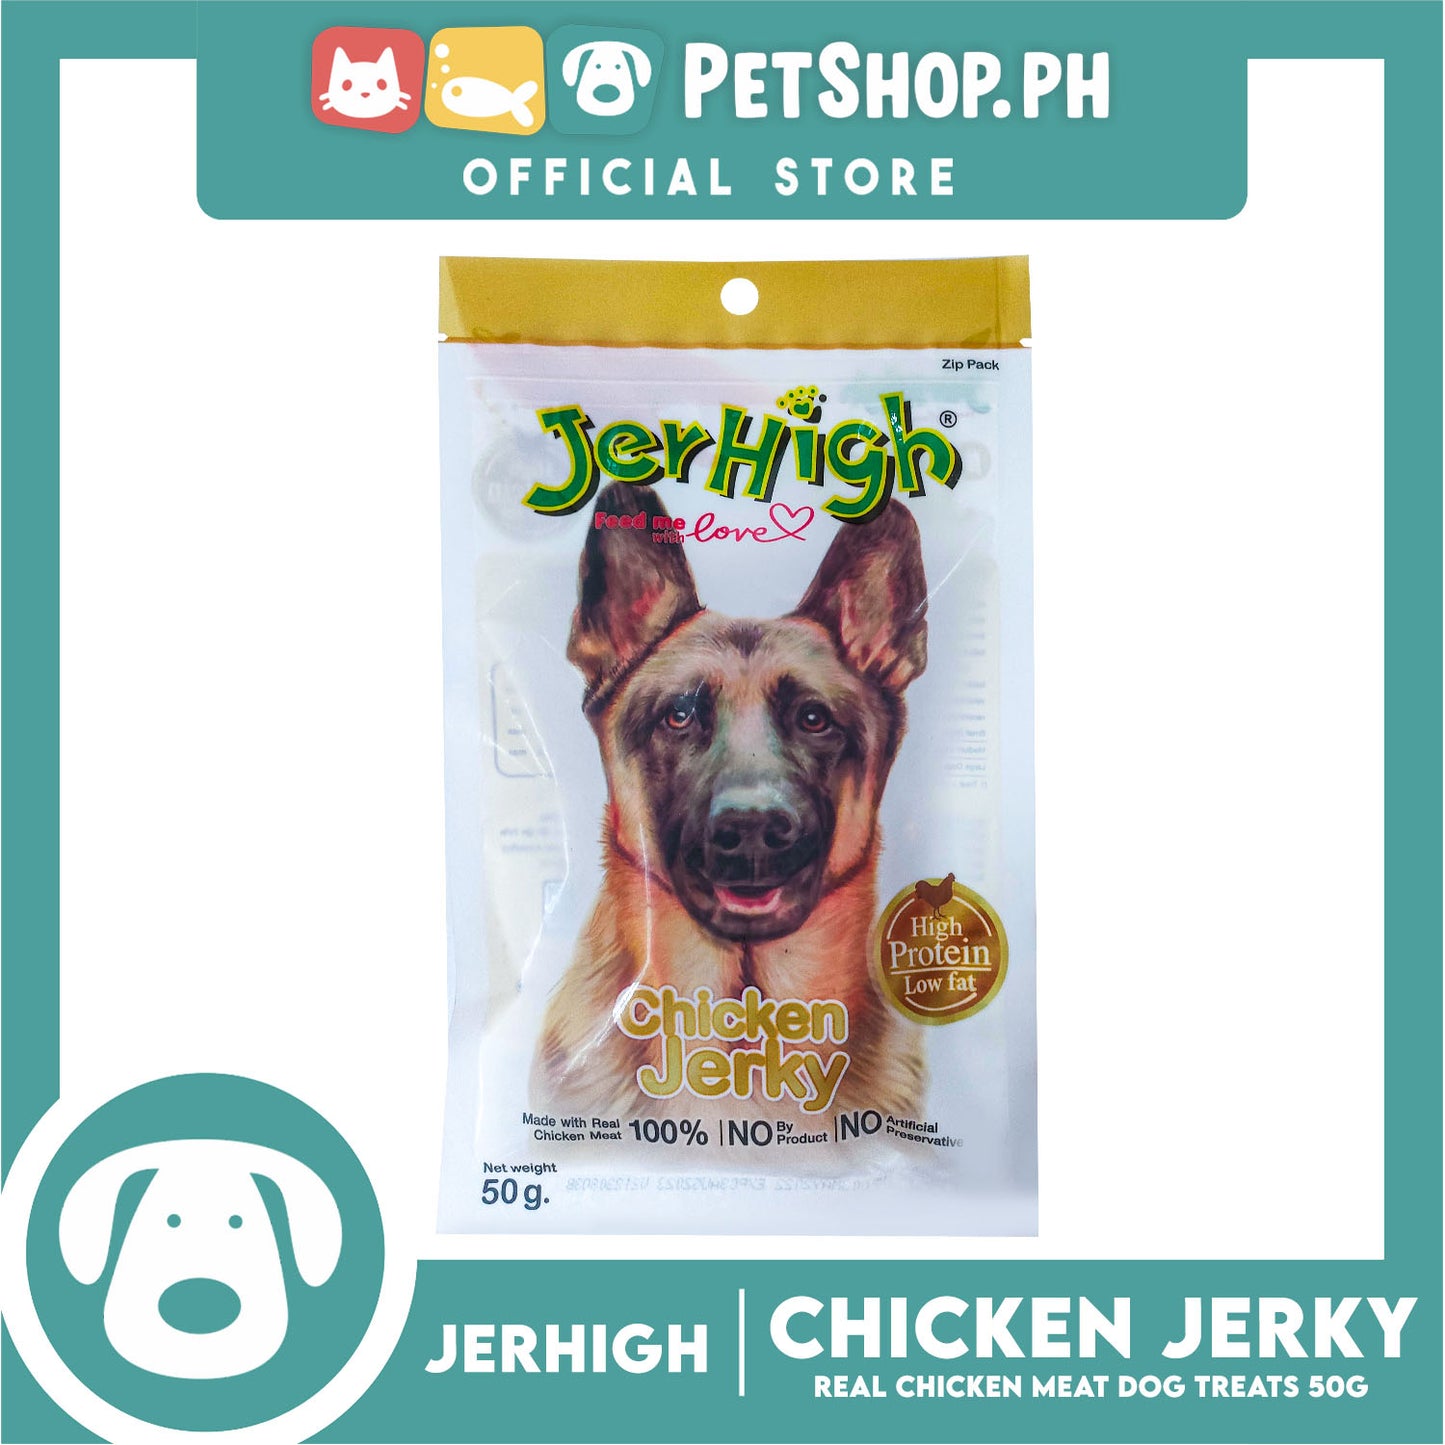 Jerhigh Chicken Jerky with Real Chicken Meat 50g Dog Treats